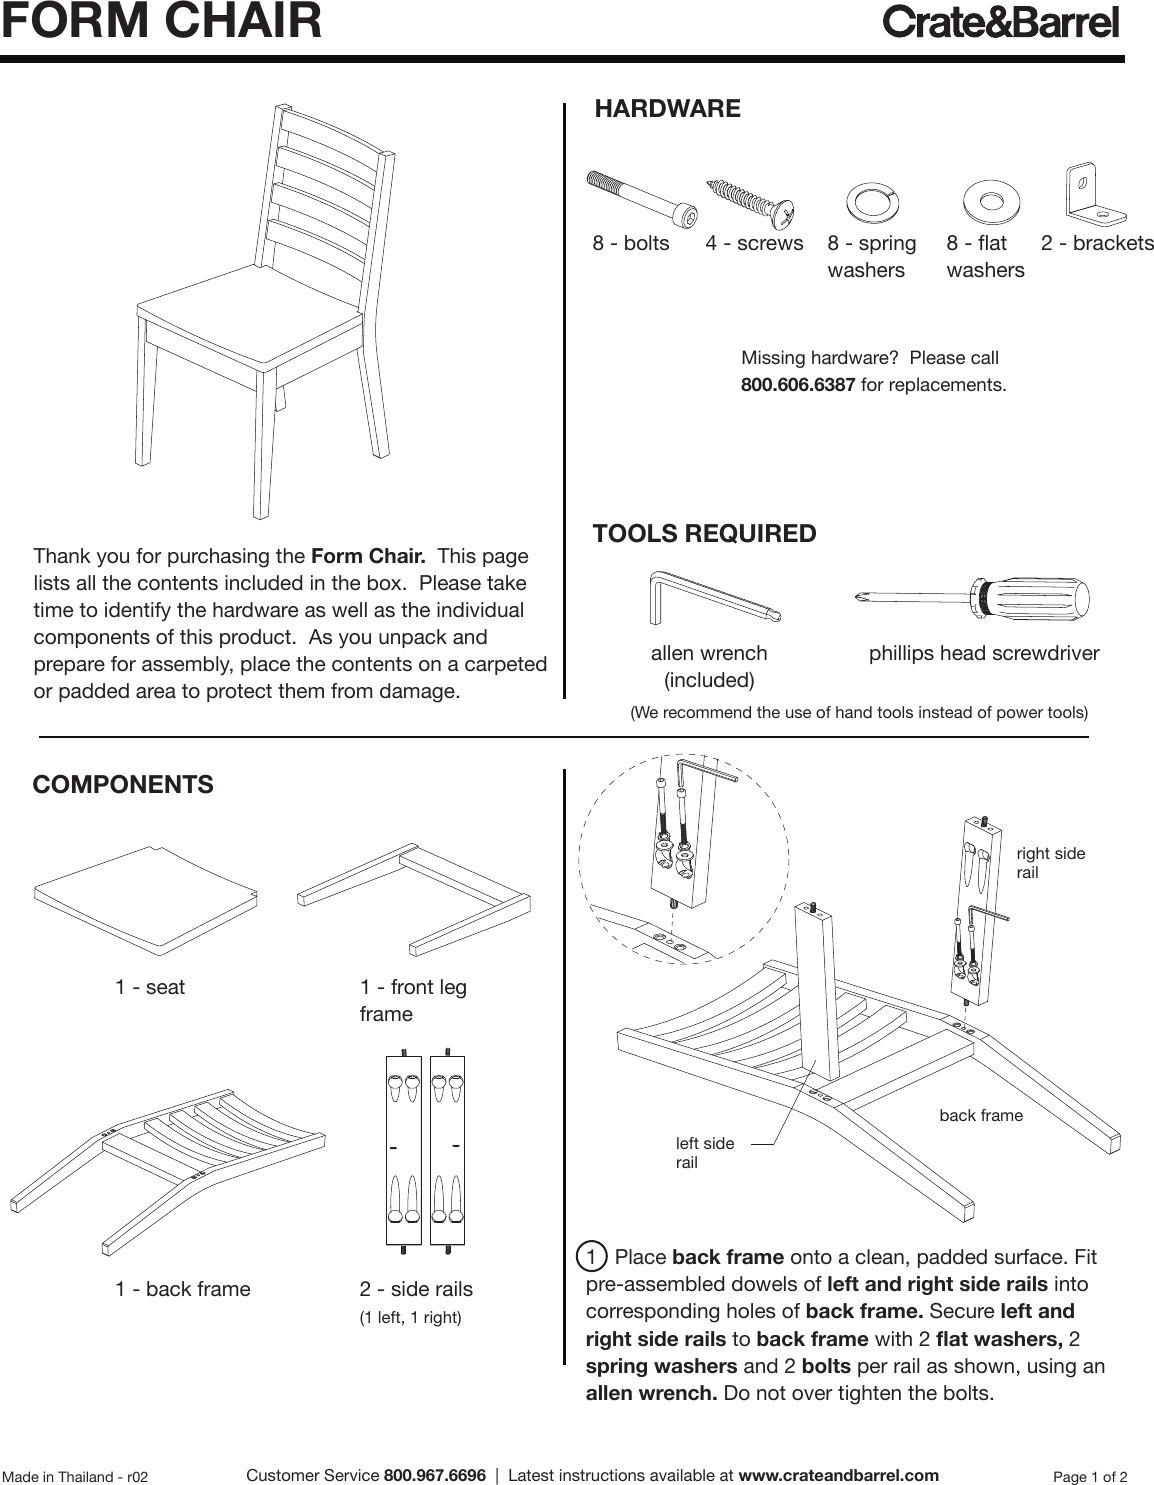 Page 1 of 2 - Crate-Barrel 478-Form-Chair Form_Chair